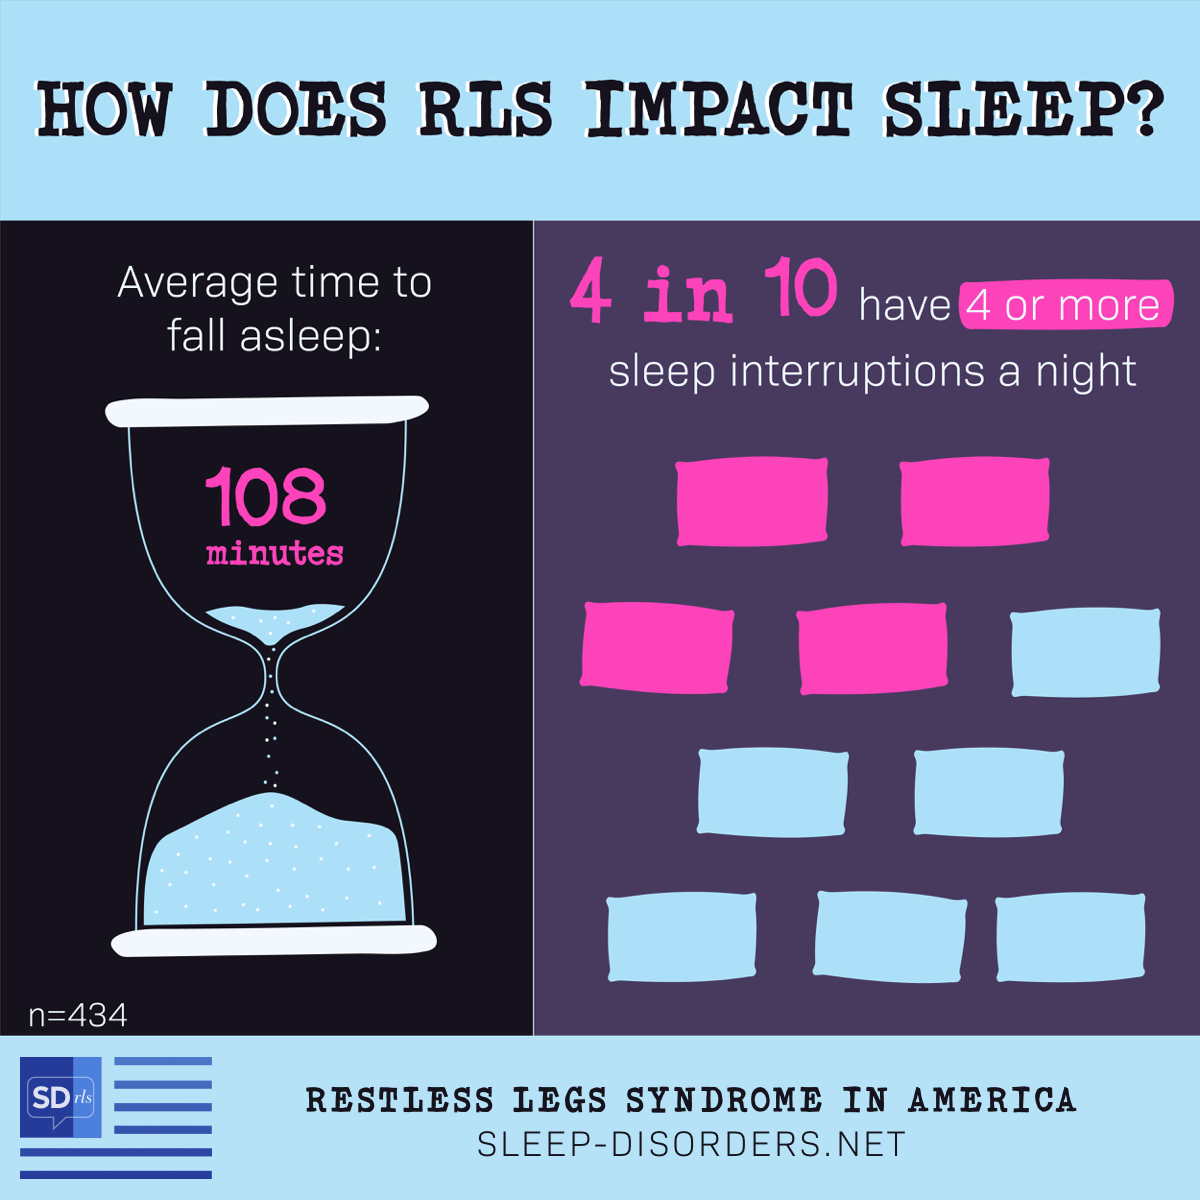 Ways that RLS impacts sleep include average time fall asleep (108 minutes) and having 4 or more sleep interruptions a night.